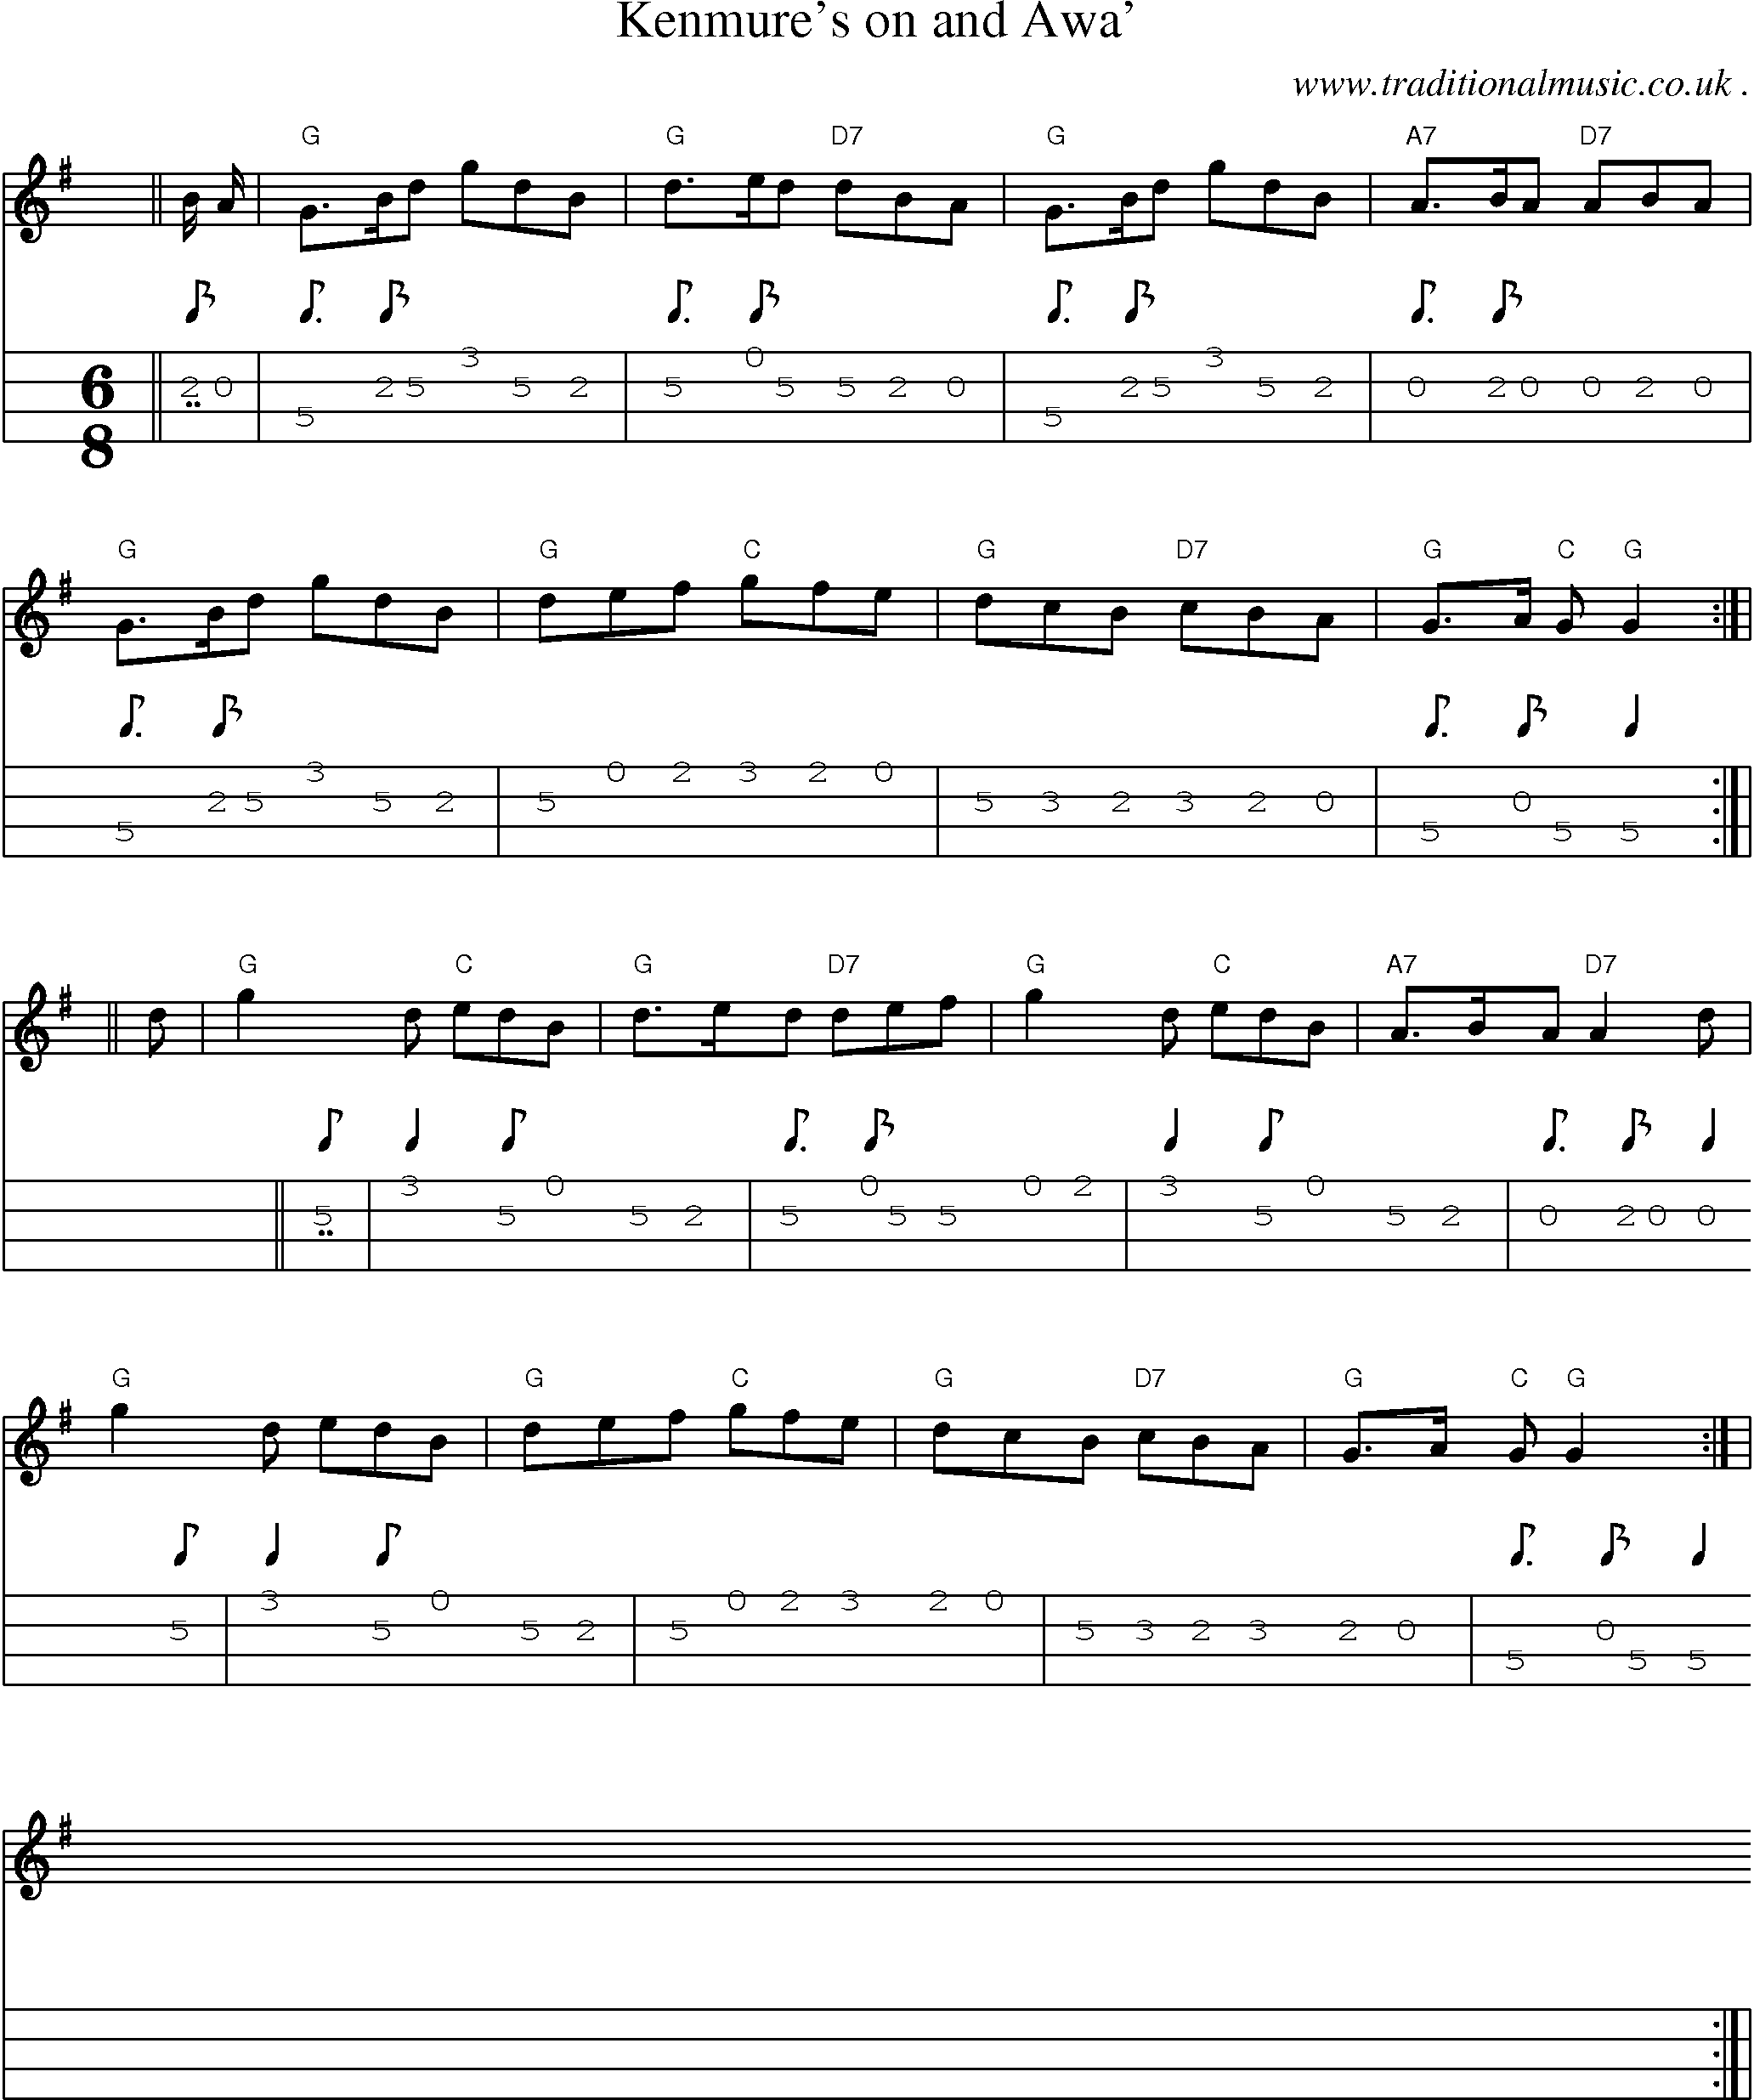 Sheet-music  score, Chords and Mandolin Tabs for Kenmures On And Awa